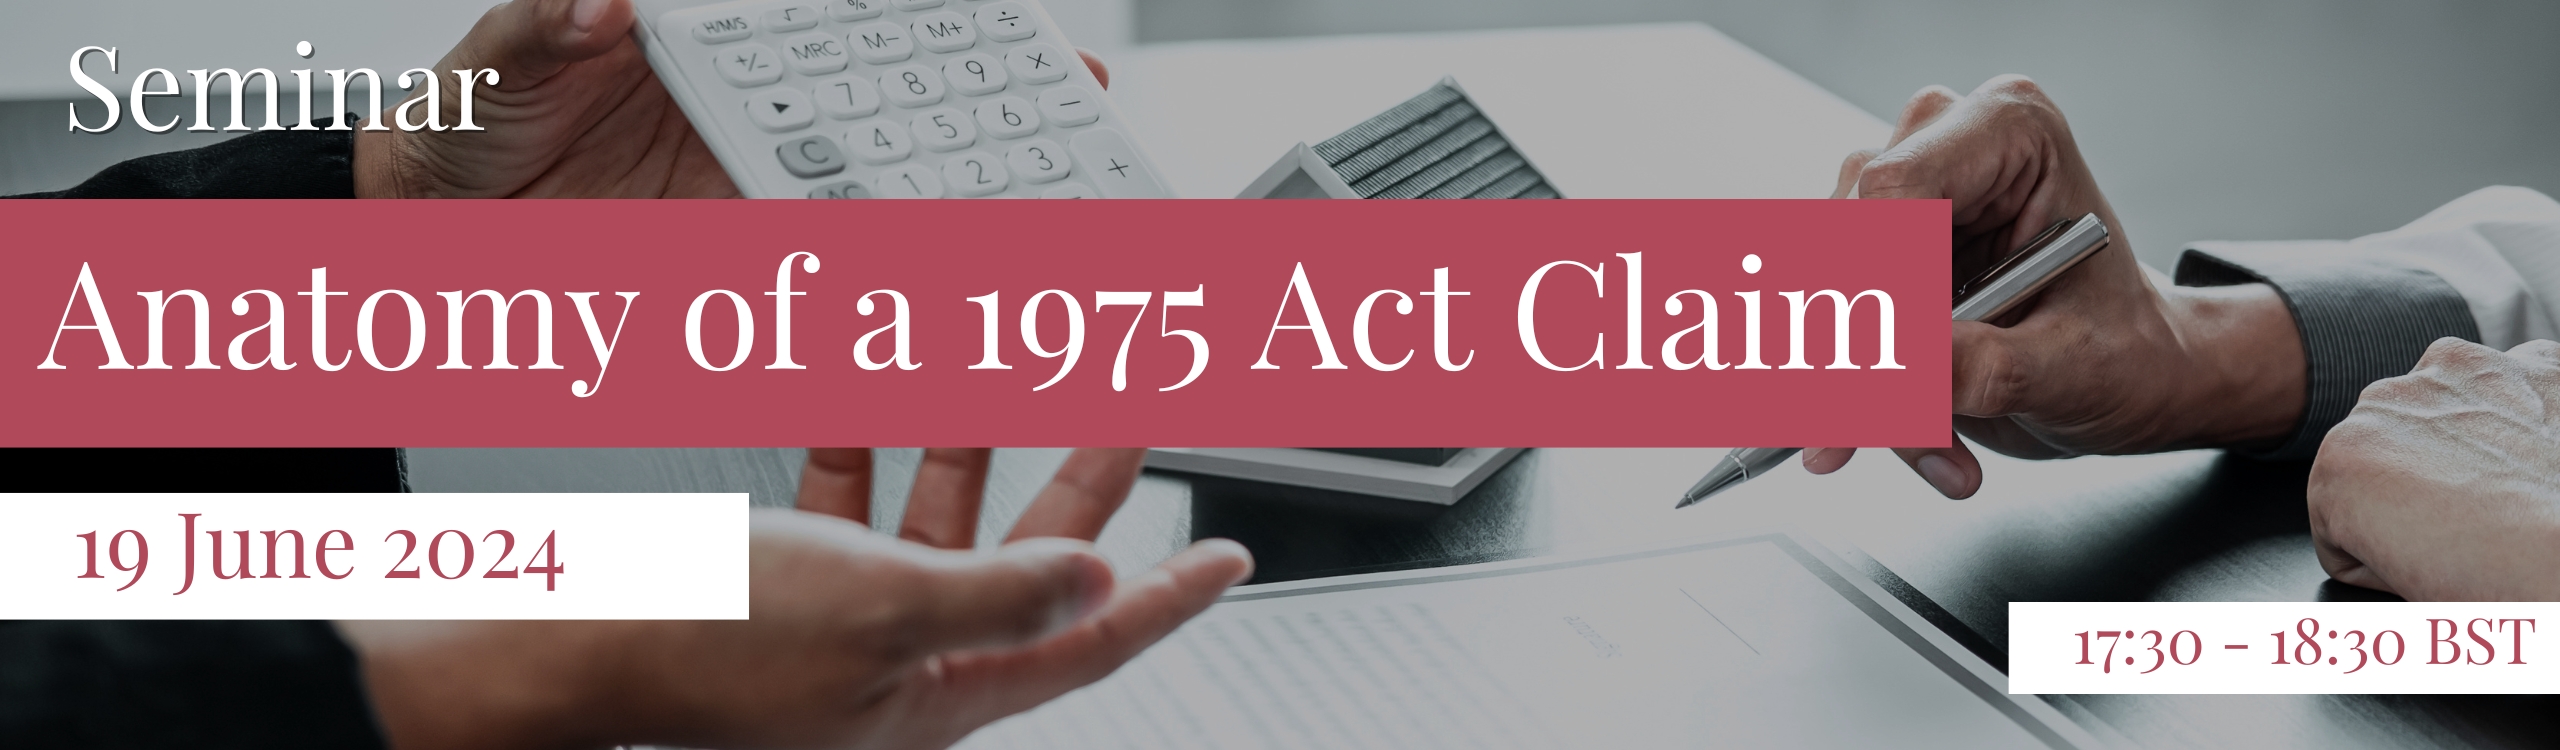 Signup for the event: Anatomy of a 1975 Act Claim